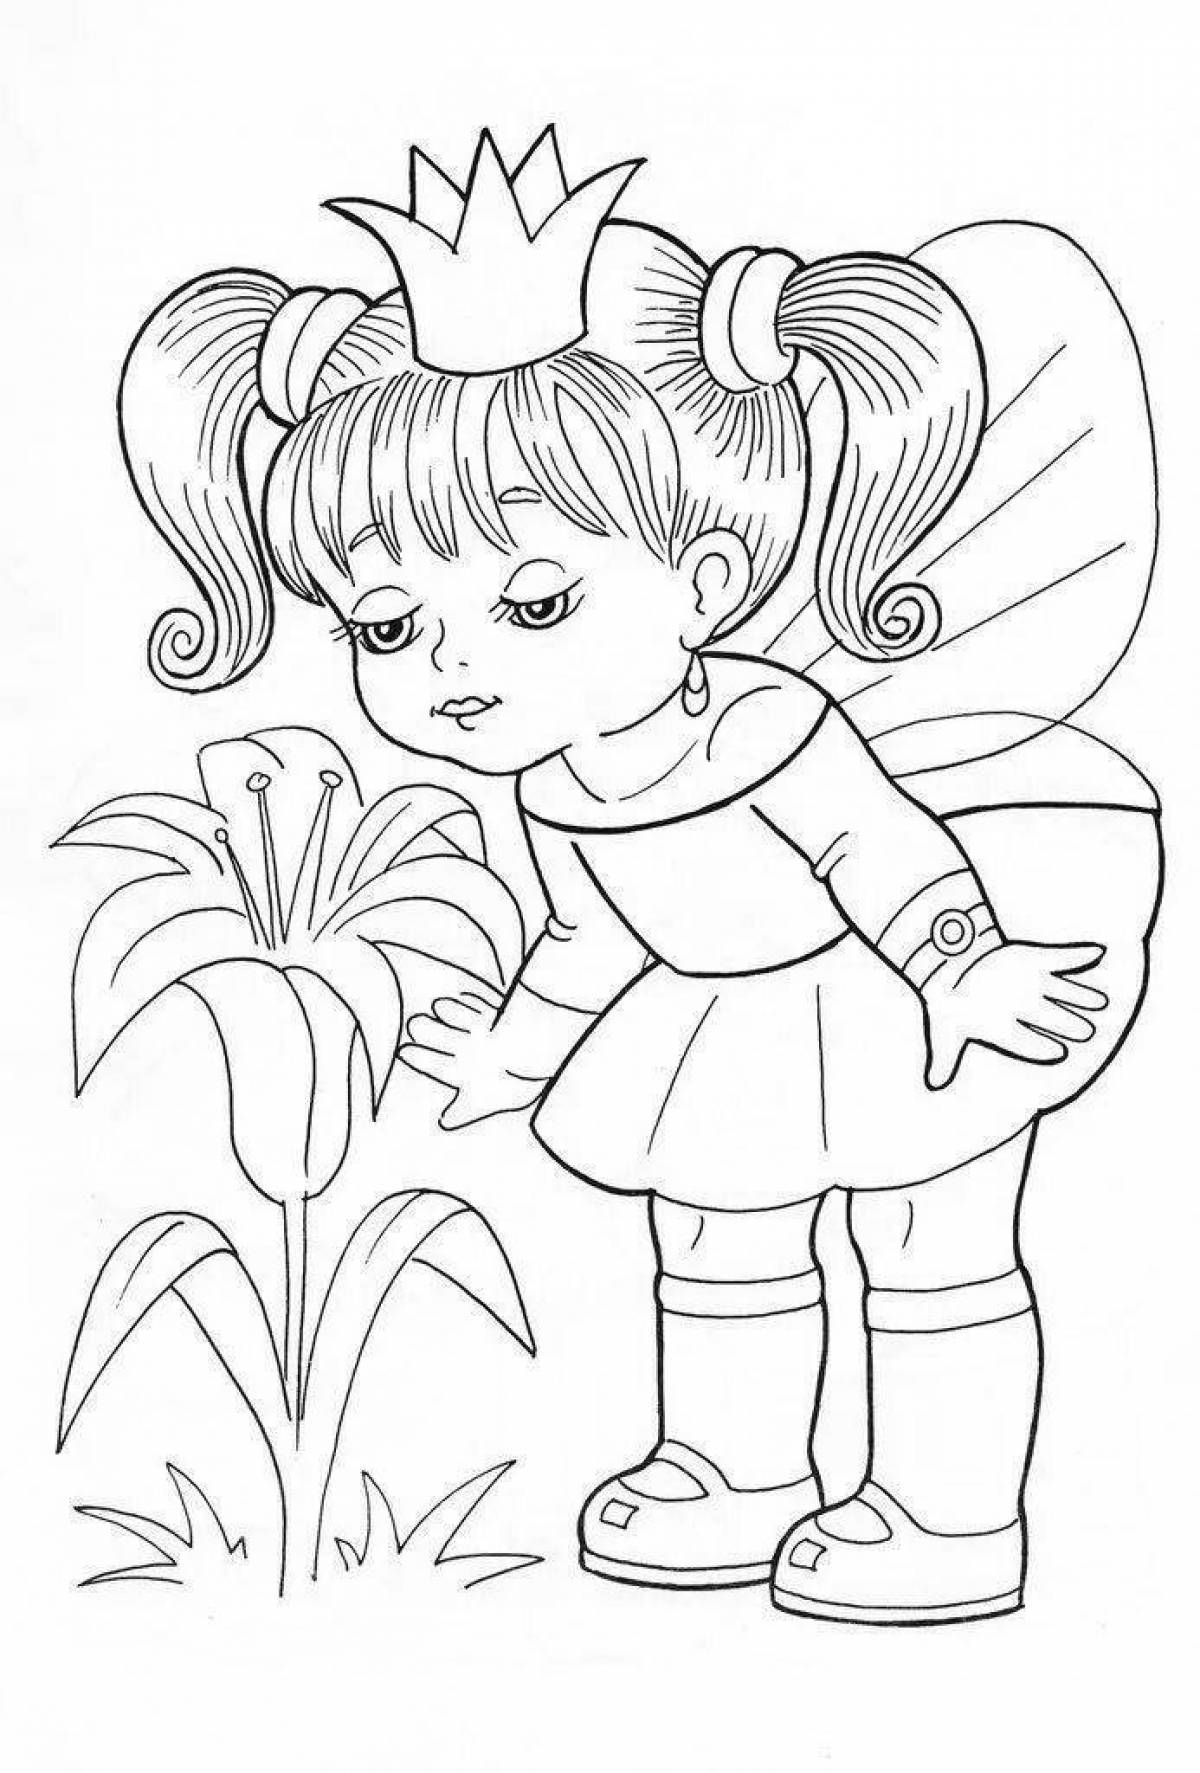 Fun coloring pages for kids online